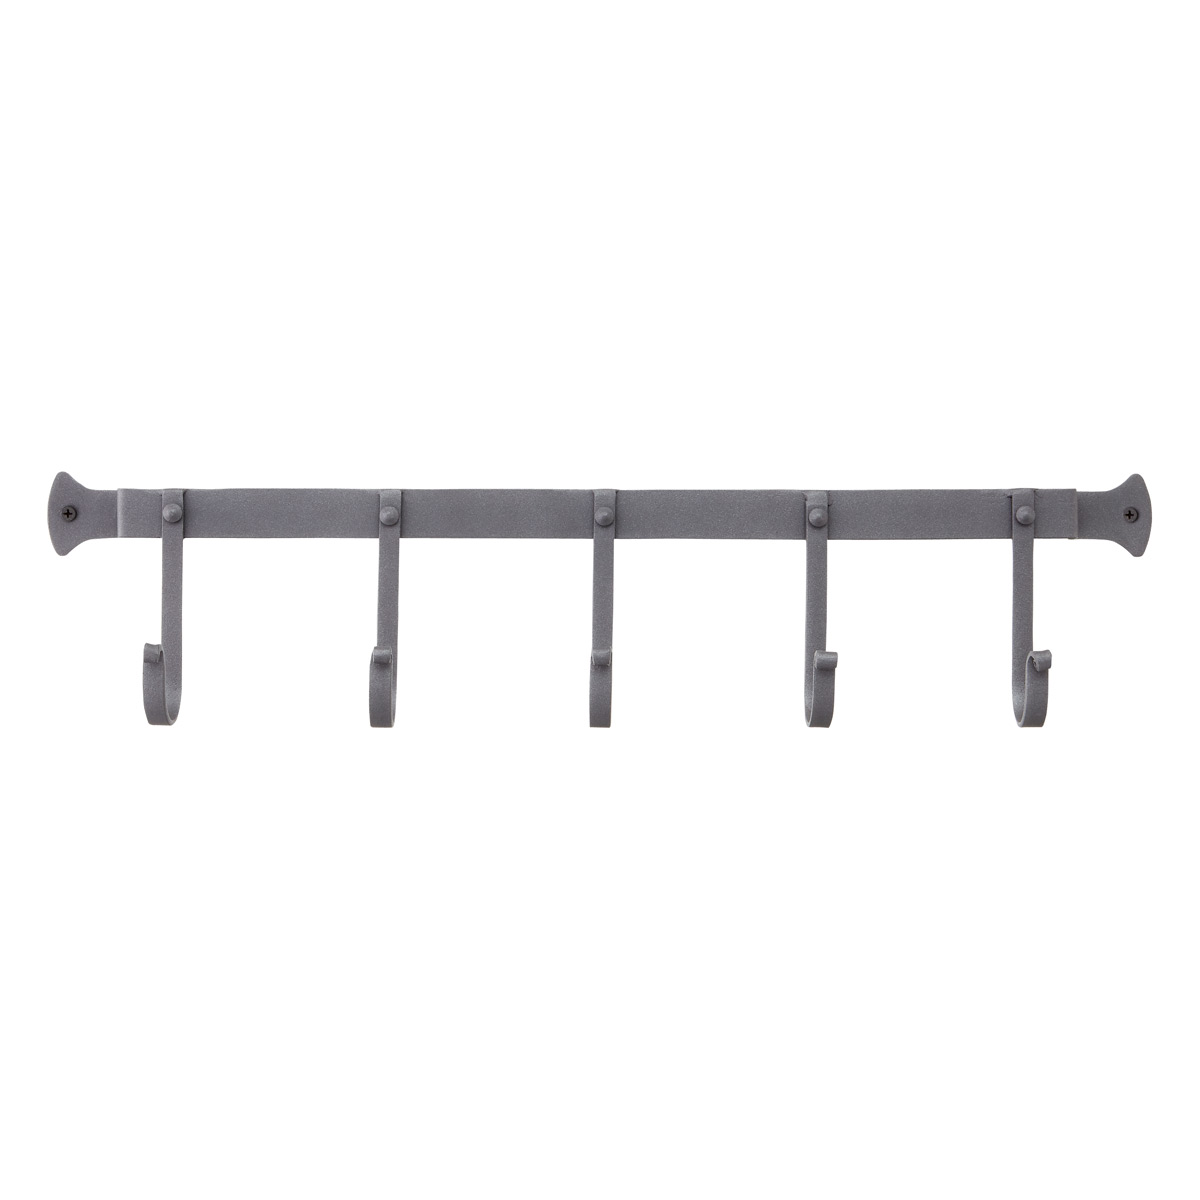 Our Cast Iron Collection & Wall Rack 